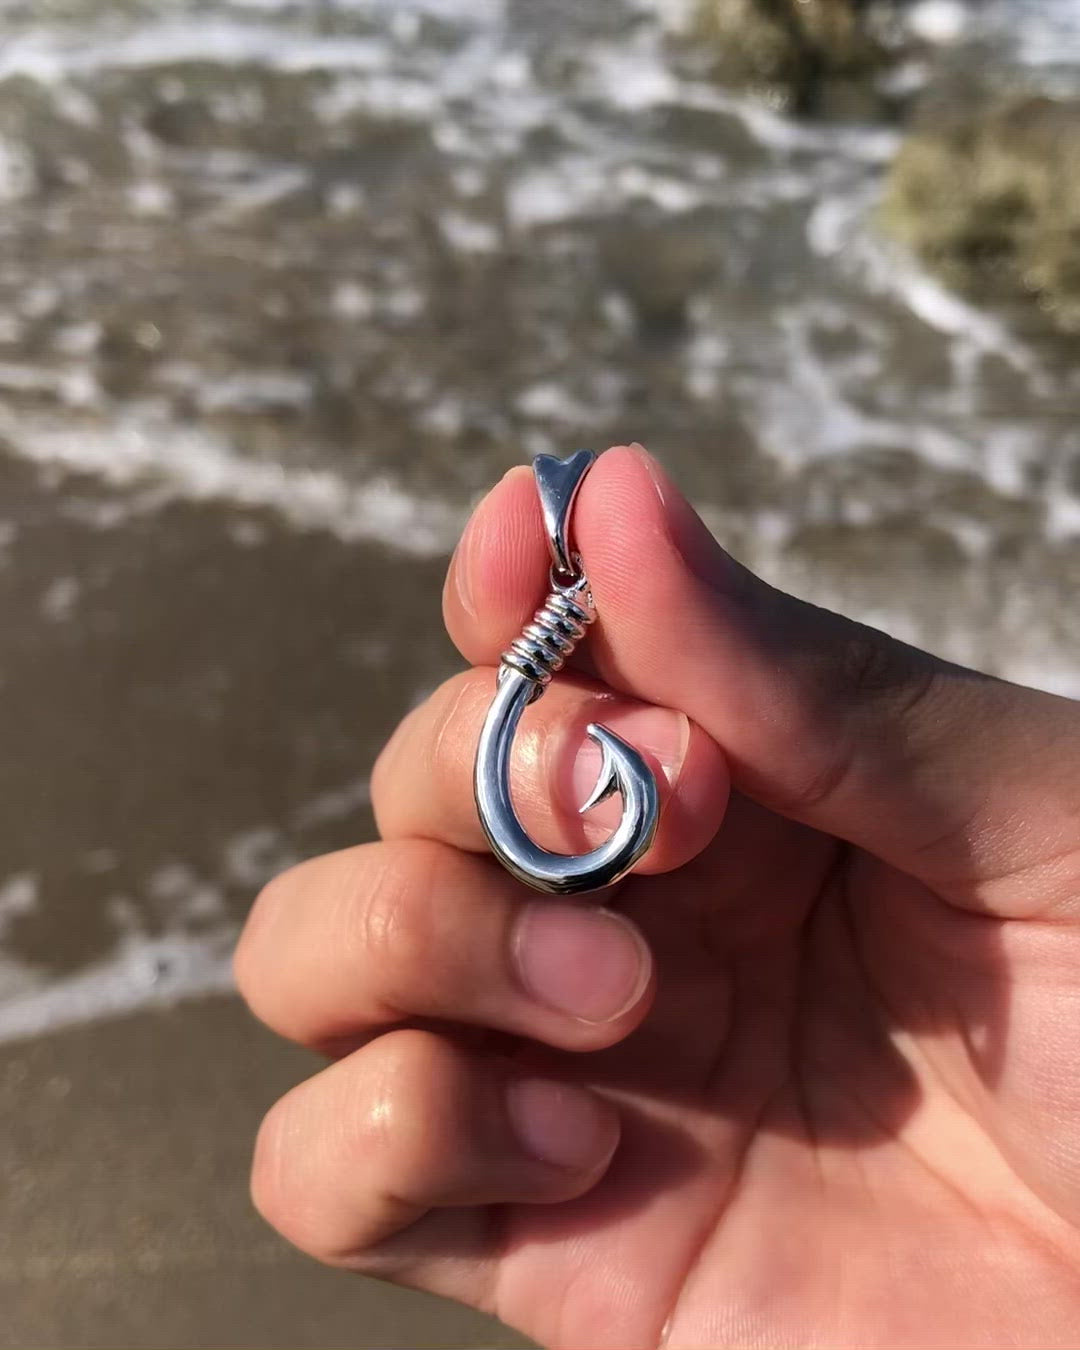 Video highlighting the details of a silver hook pendant, in a live beach setting.